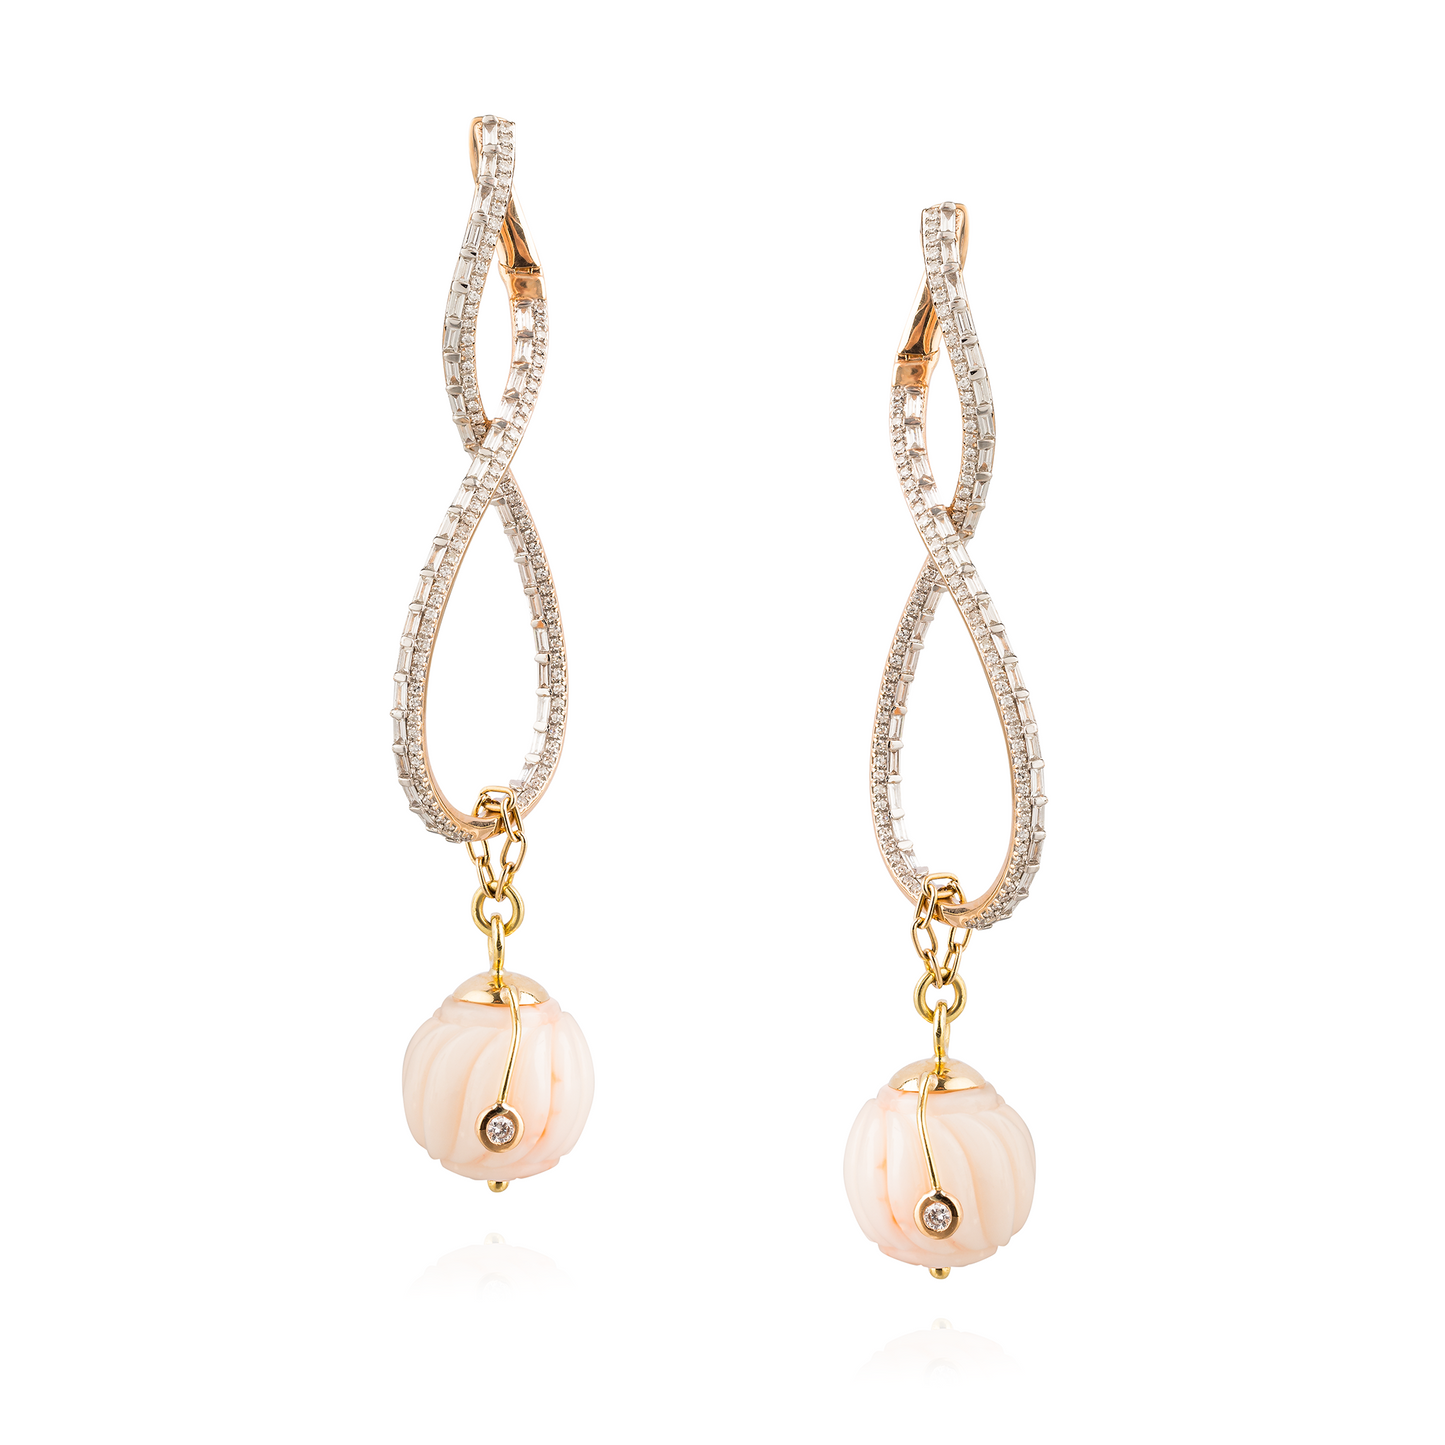 14KT Yellow Gold Earrings with Marquise White Diamonds